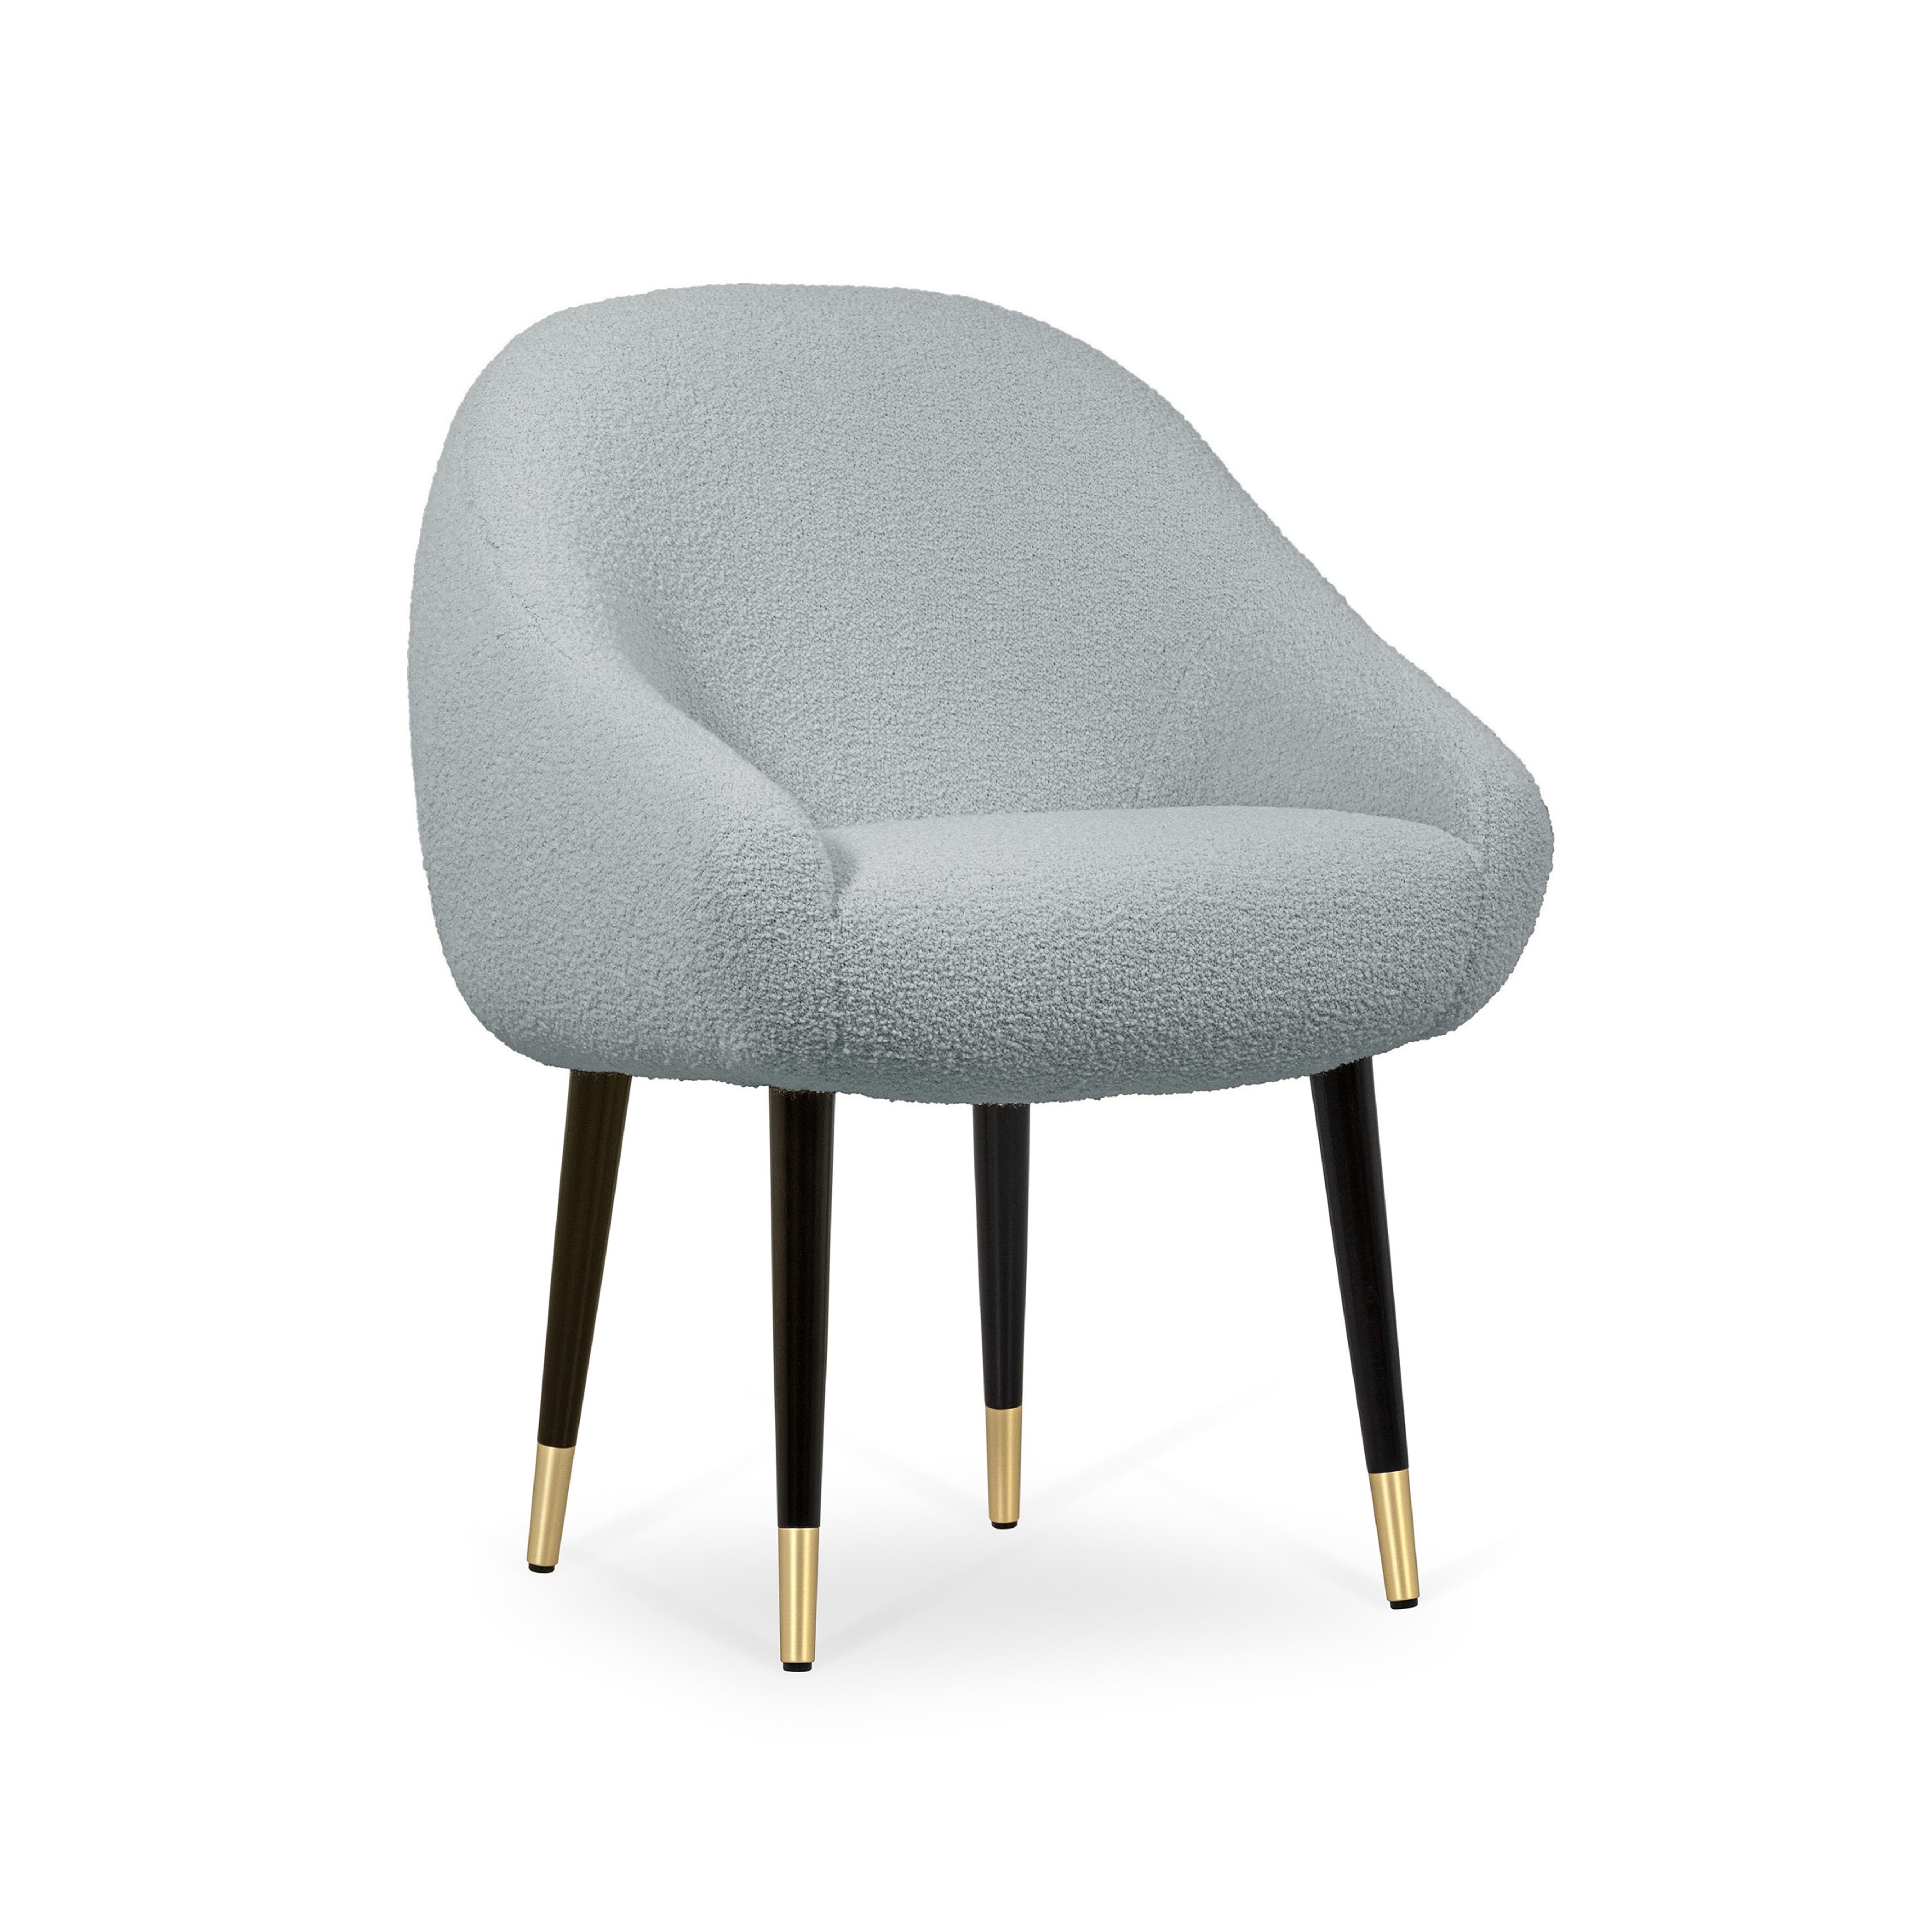 The Niemeyer dining chair is named after the Brazilian Architect Oscar Niemeyer whose Architecture was spread like sculptural poetry in the History of humankind. The rounded lines of the chair are influenced by the remarkable 'Casa das Canoas'